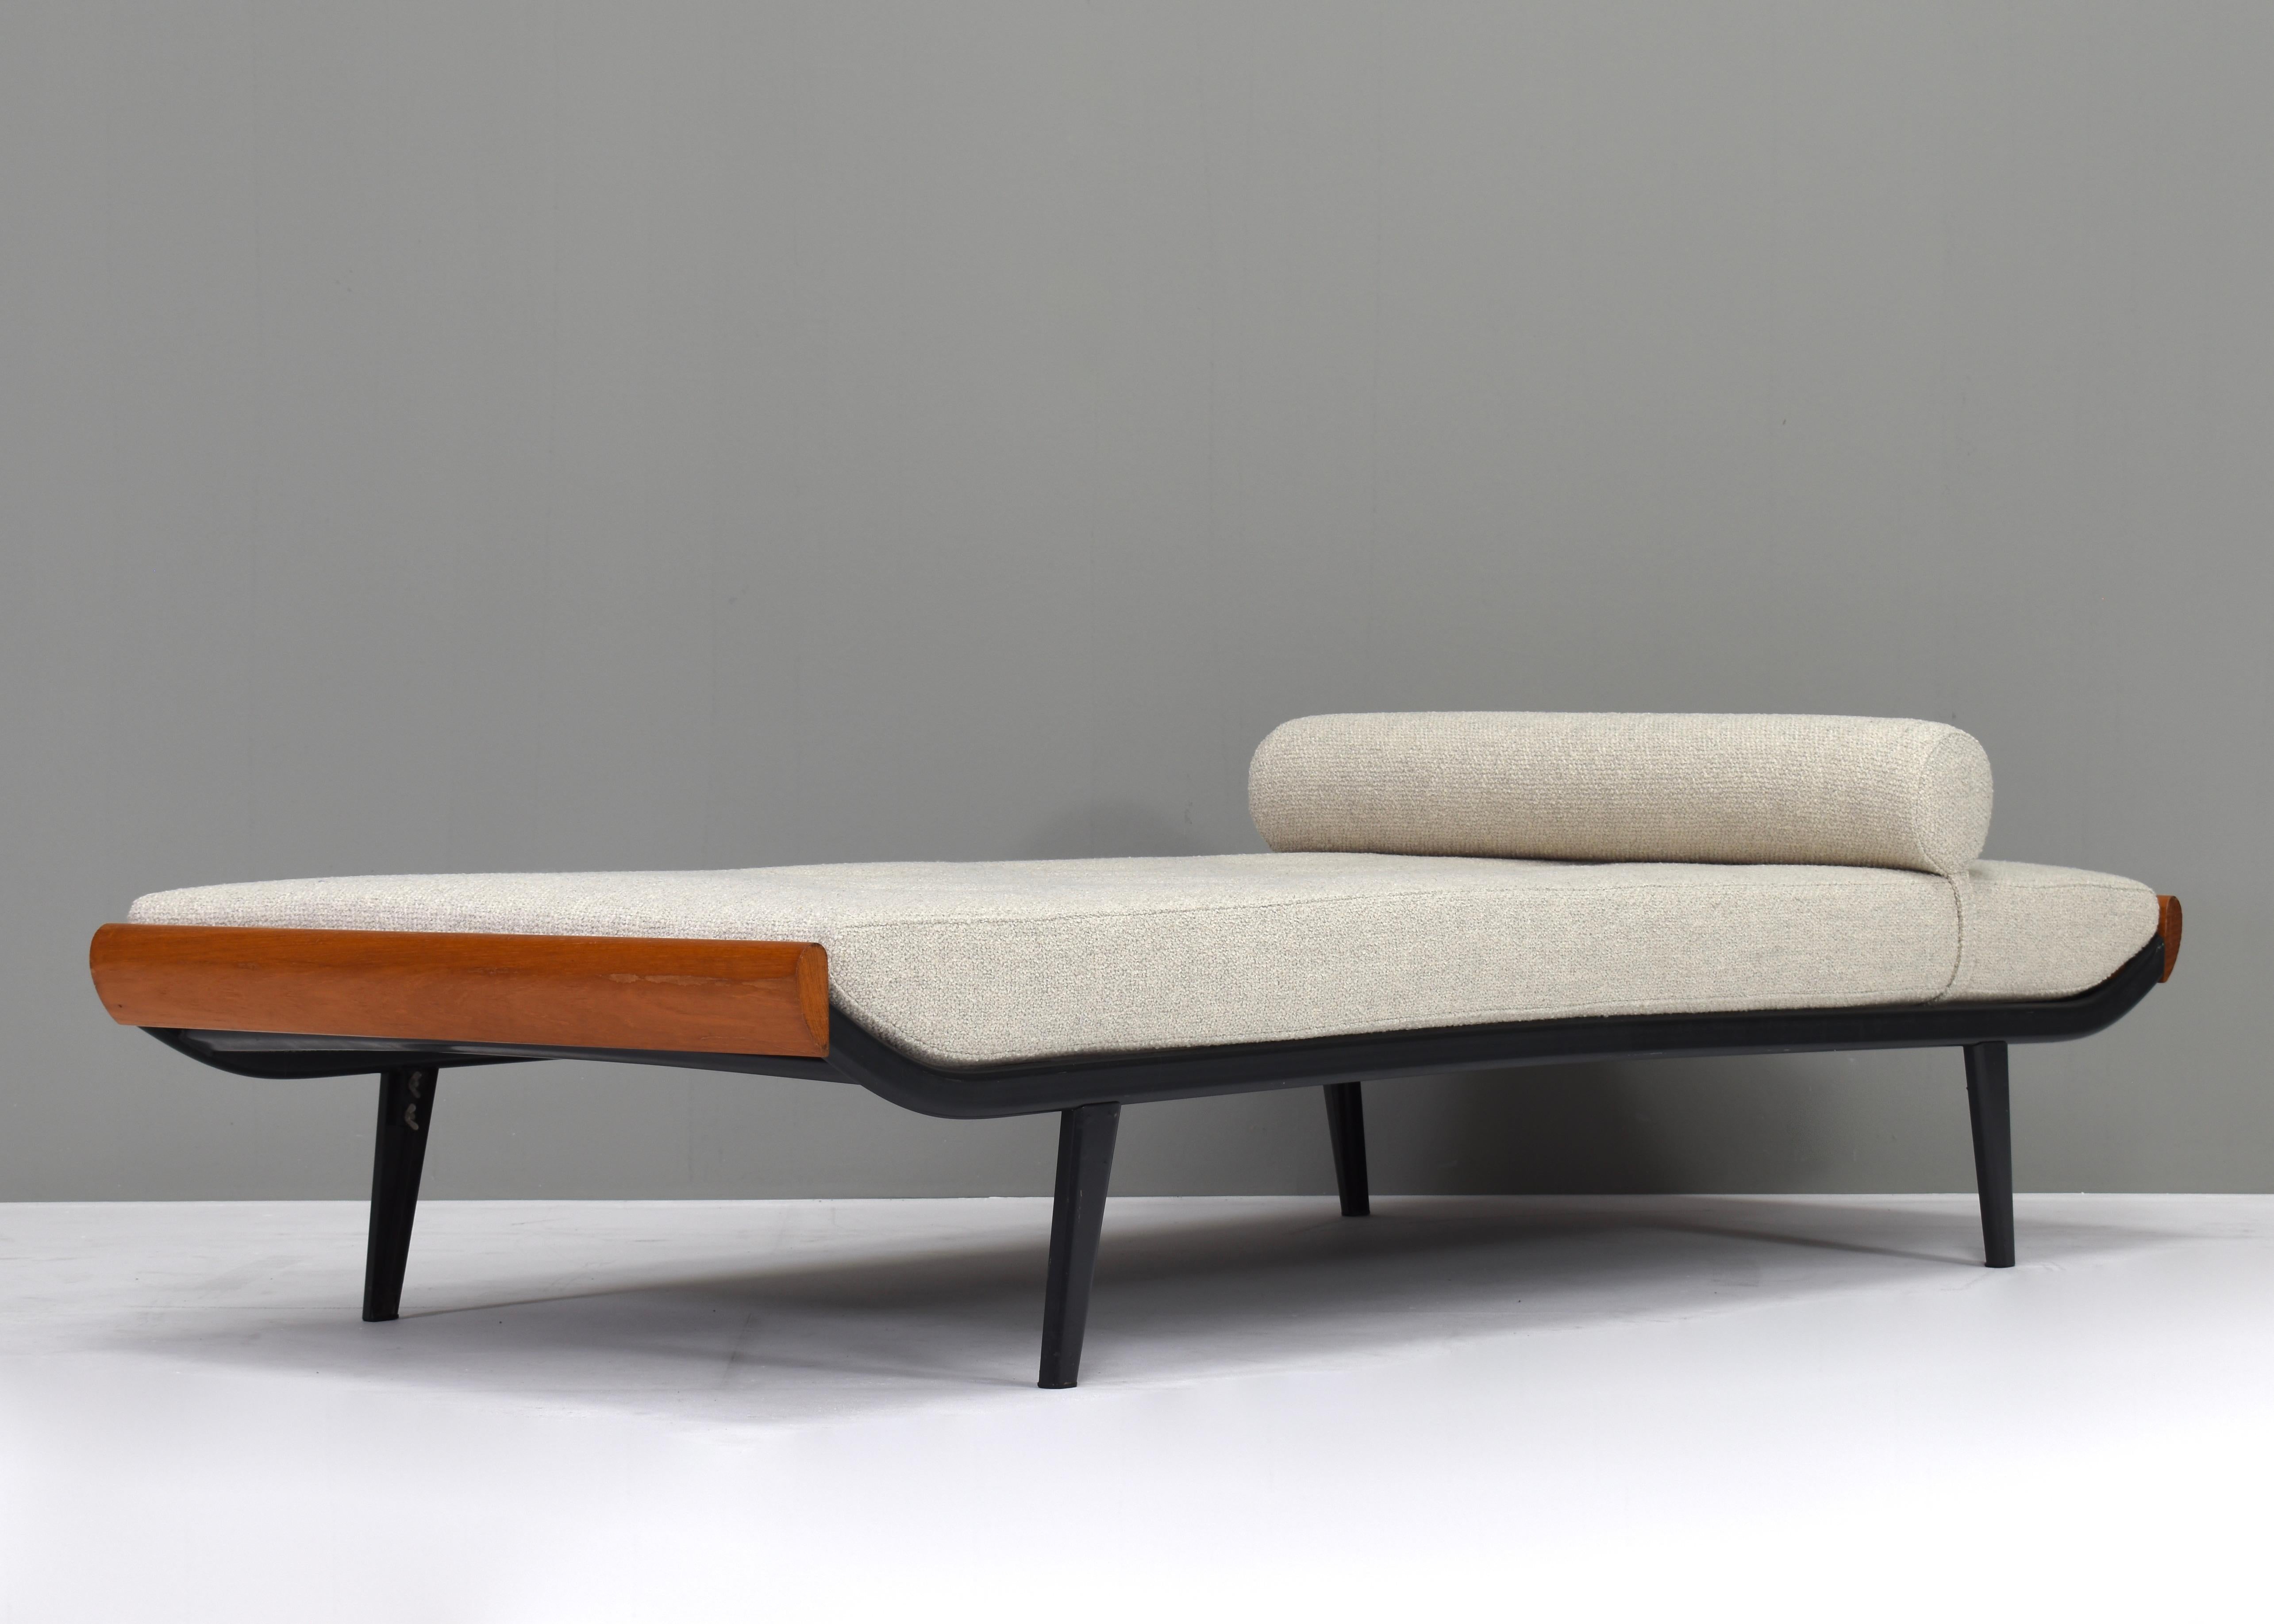 Metal Cleopatra Daybed Designed by Cordemeijer for Auping, Netherlands, 1954